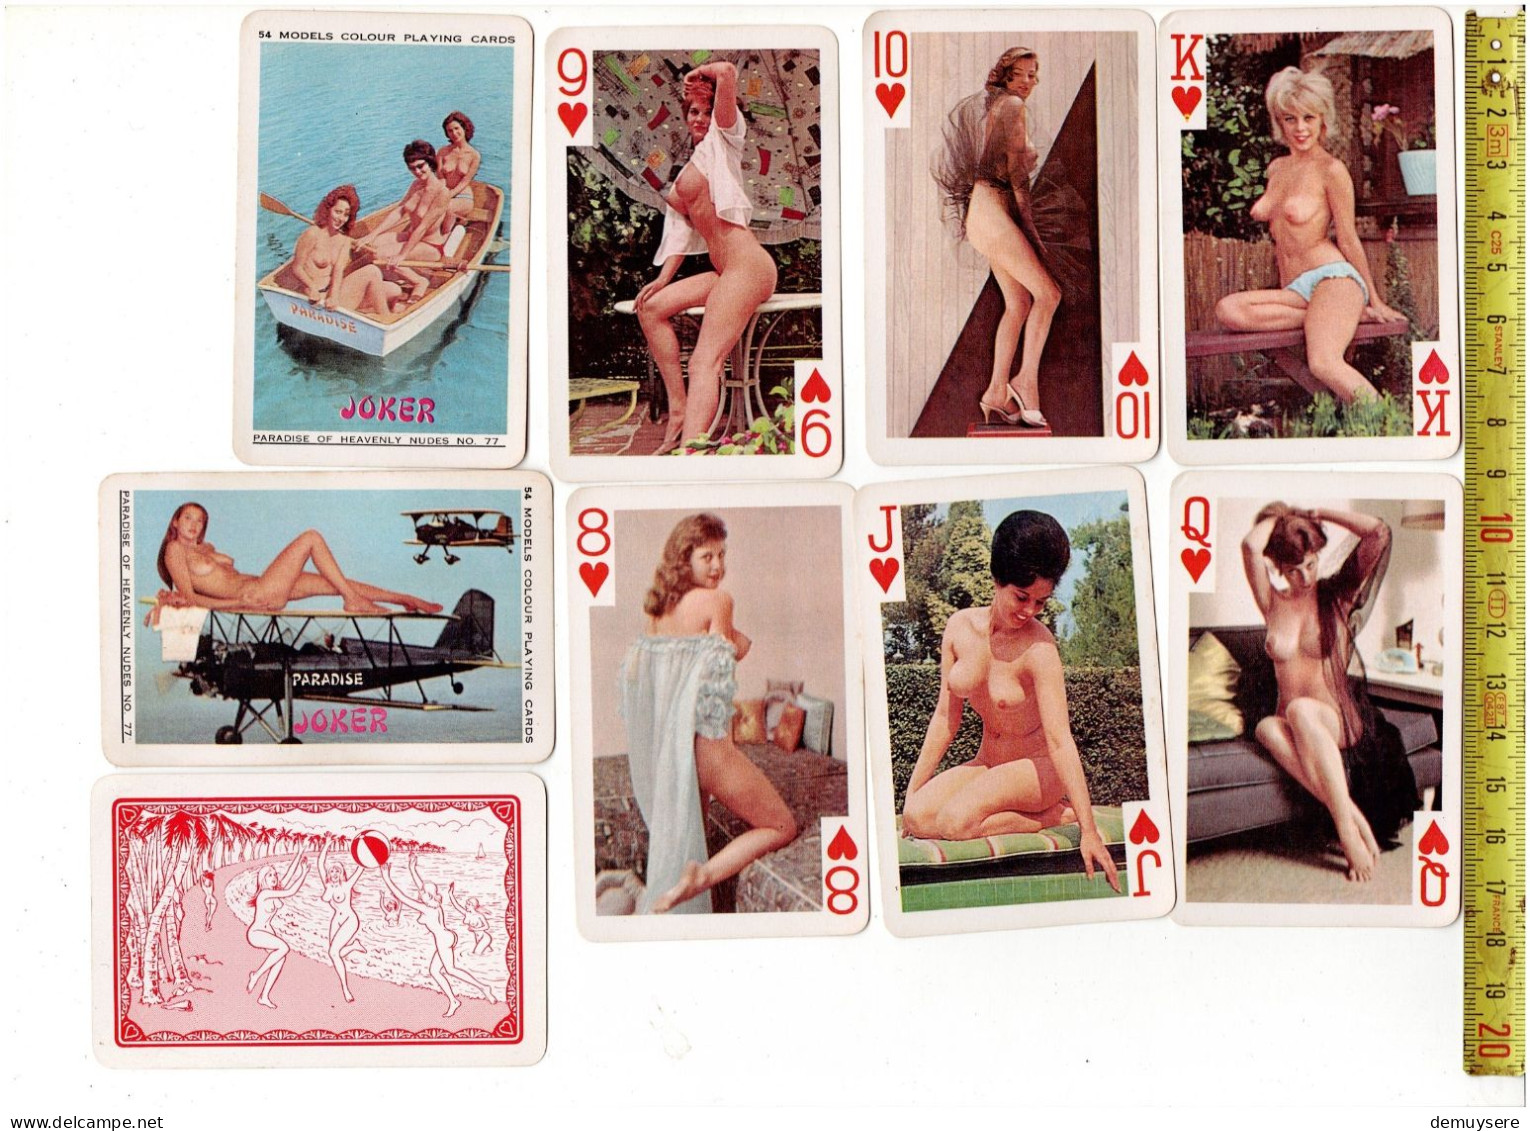 54 MODELS COLOUR PLAYING CARDS - PARADISE OF HEAVENLY NUDES NO 77 - Carte Da Gioco